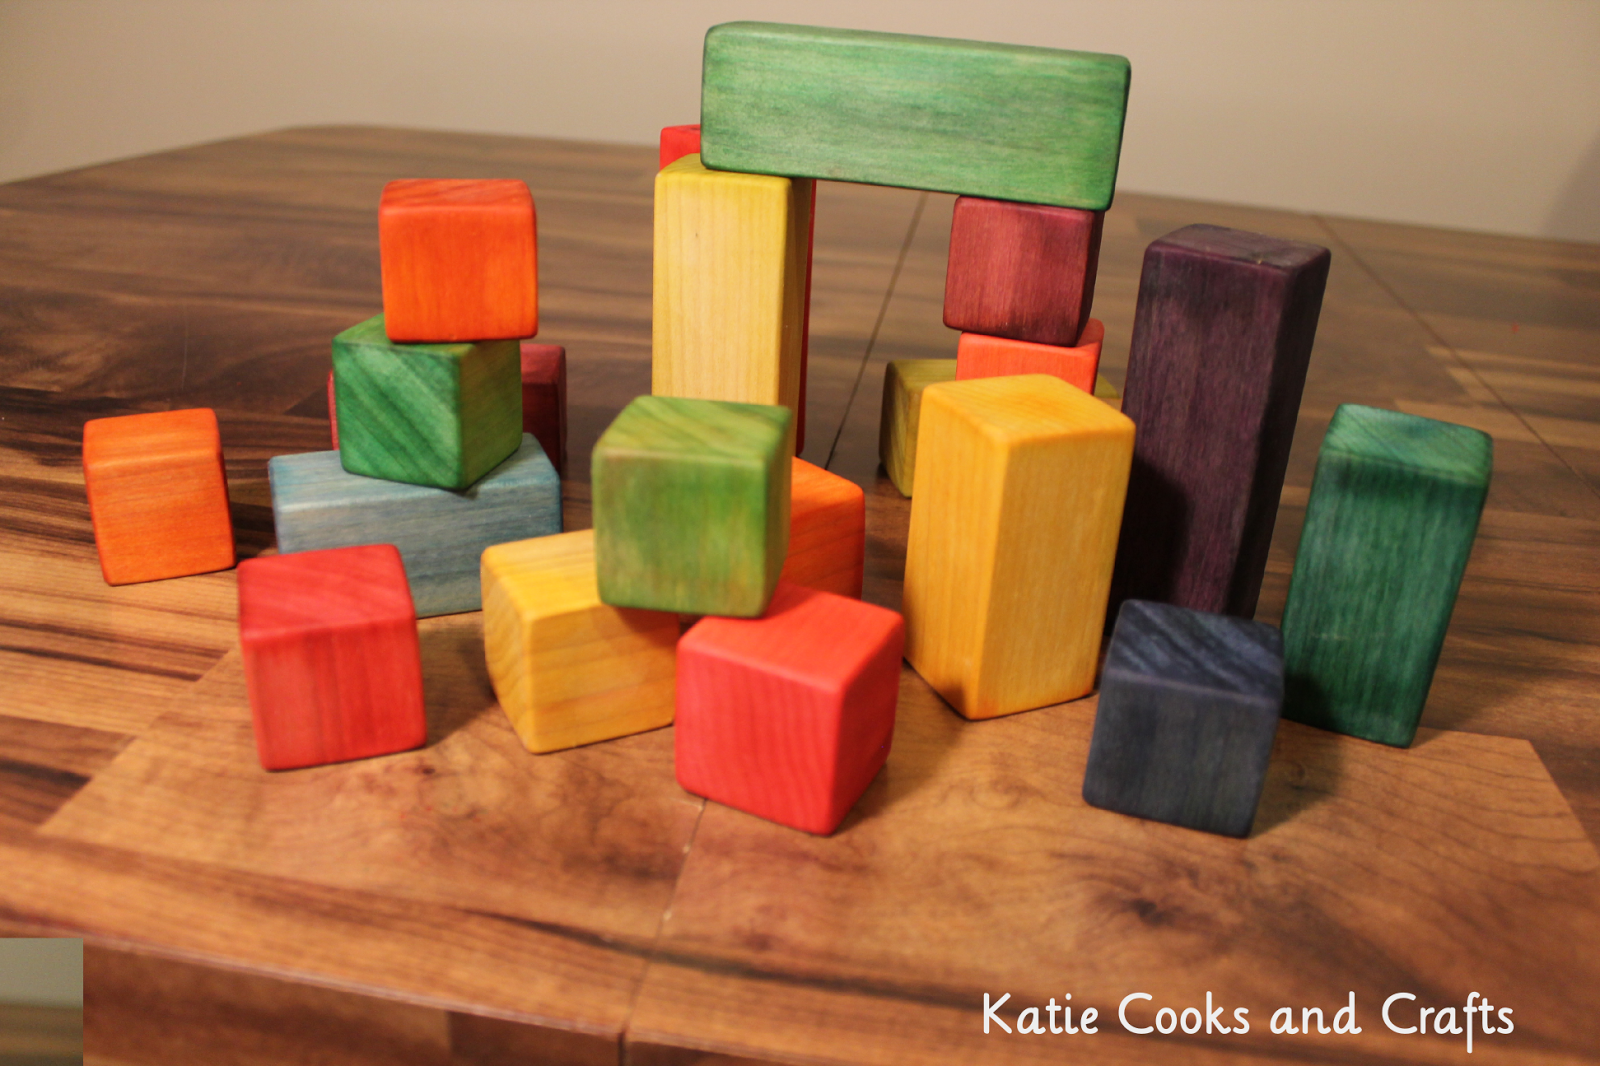 Katie Cooks and Crafts DIY Wooden Blocks Easy Wood Toy